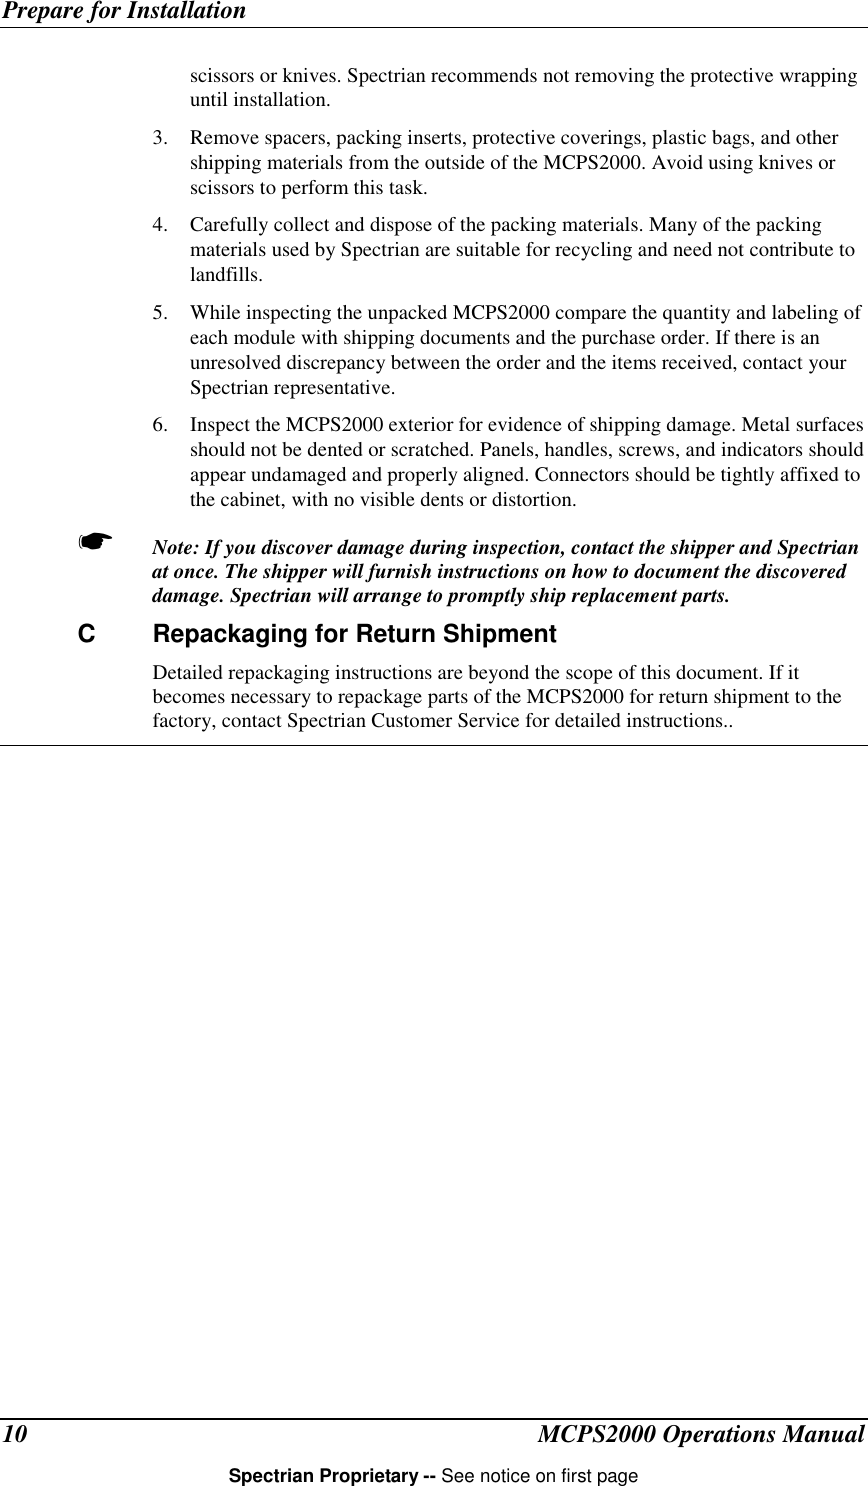 Prepare for InstallationMCPS2000 Operations ManualSpectrian Proprietary -- See notice on first page10scissors or knives. Spectrian recommends not removing the protective wrappinguntil installation.3. Remove spacers, packing inserts, protective coverings, plastic bags, and othershipping materials from the outside of the MCPS2000. Avoid using knives orscissors to perform this task.4. Carefully collect and dispose of the packing materials. Many of the packingmaterials used by Spectrian are suitable for recycling and need not contribute tolandfills.5. While inspecting the unpacked MCPS2000 compare the quantity and labeling ofeach module with shipping documents and the purchase order. If there is anunresolved discrepancy between the order and the items received, contact yourSpectrian representative.6. Inspect the MCPS2000 exterior for evidence of shipping damage. Metal surfacesshould not be dented or scratched. Panels, handles, screws, and indicators shouldappear undamaged and properly aligned. Connectors should be tightly affixed tothe cabinet, with no visible dents or distortion.☛ Note: If you discover damage during inspection, contact the shipper and Spectrianat once. The shipper will furnish instructions on how to document the discovereddamage. Spectrian will arrange to promptly ship replacement parts.C Repackaging for Return ShipmentDetailed repackaging instructions are beyond the scope of this document. If itbecomes necessary to repackage parts of the MCPS2000 for return shipment to thefactory, contact Spectrian Customer Service for detailed instructions..